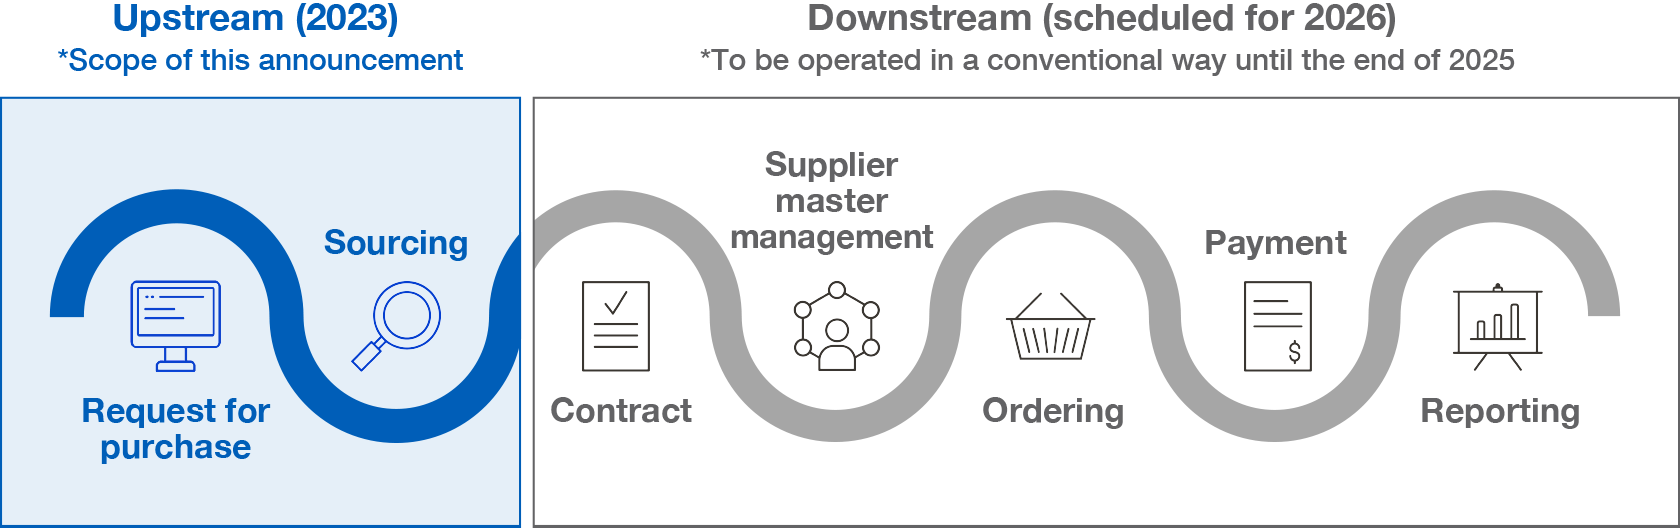 Upstream (2023) *Scope of this announcement Request for purchase,Sourcing Downstream (scheduled for 2026) *To be operated in a conventional way until the end of 2025 Contract,Supplier master management,Ordering,Payment,Reporting